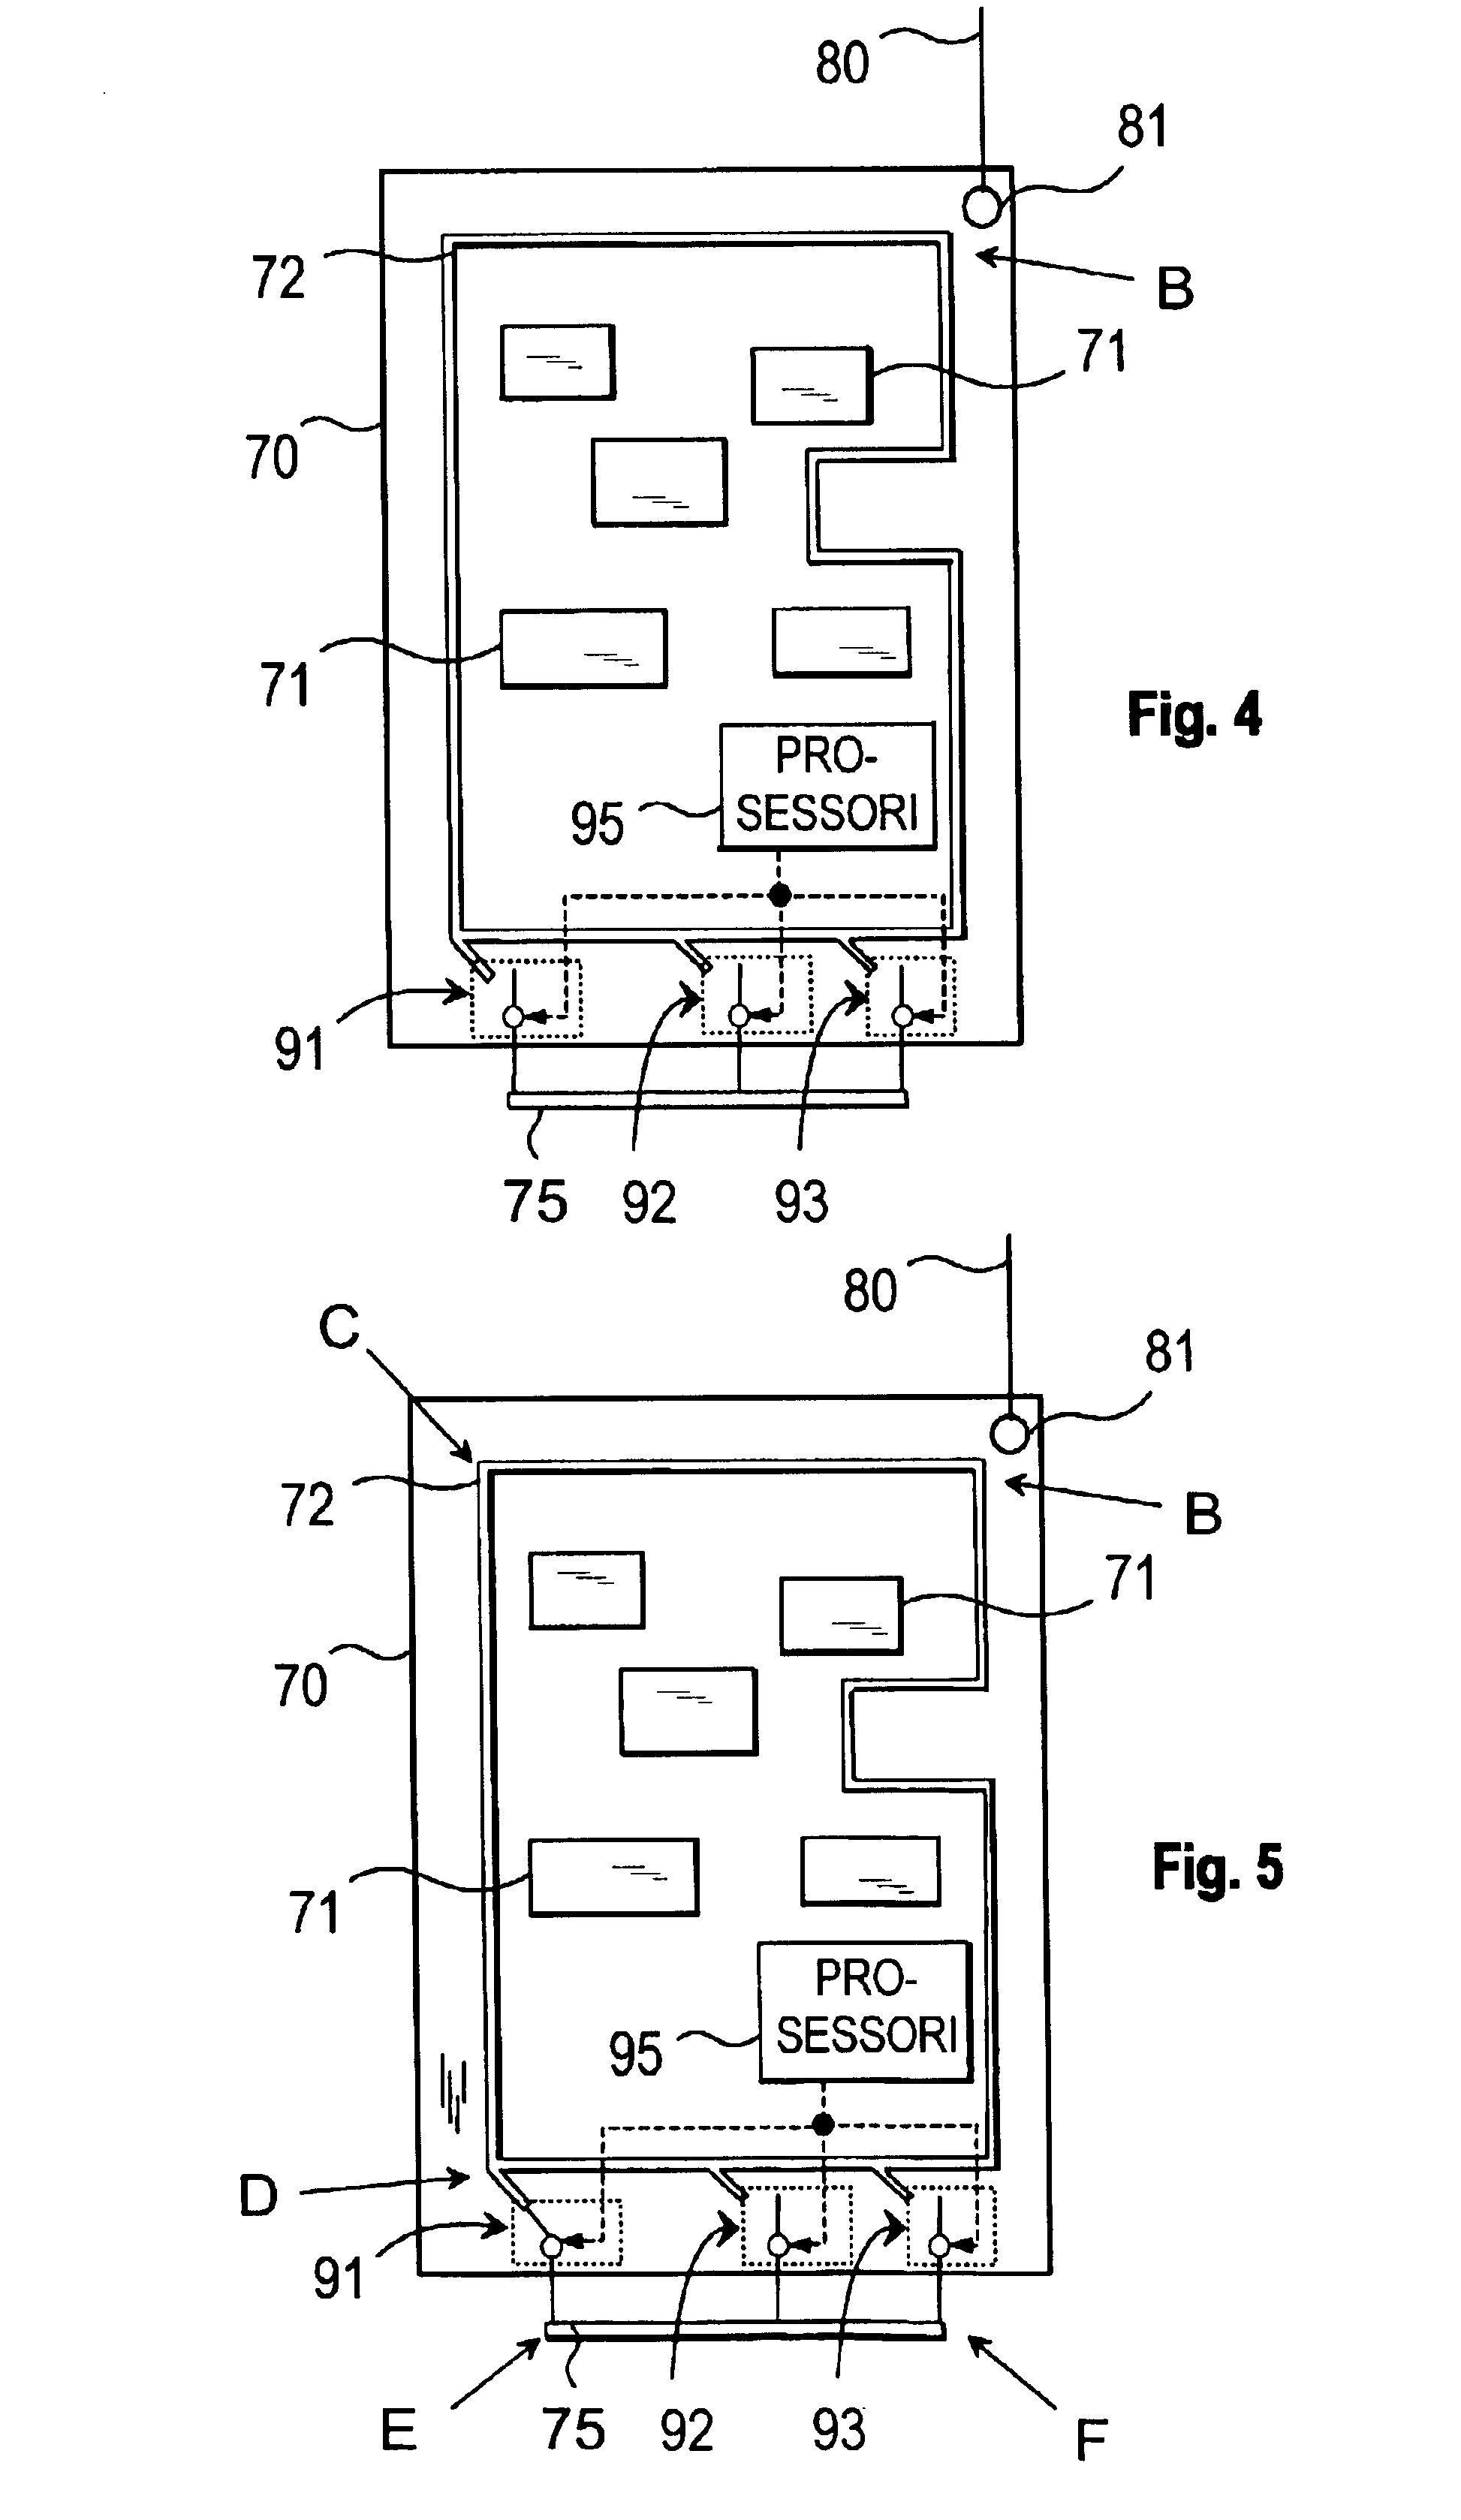 Ground arrangement for a device using wireless data transfer